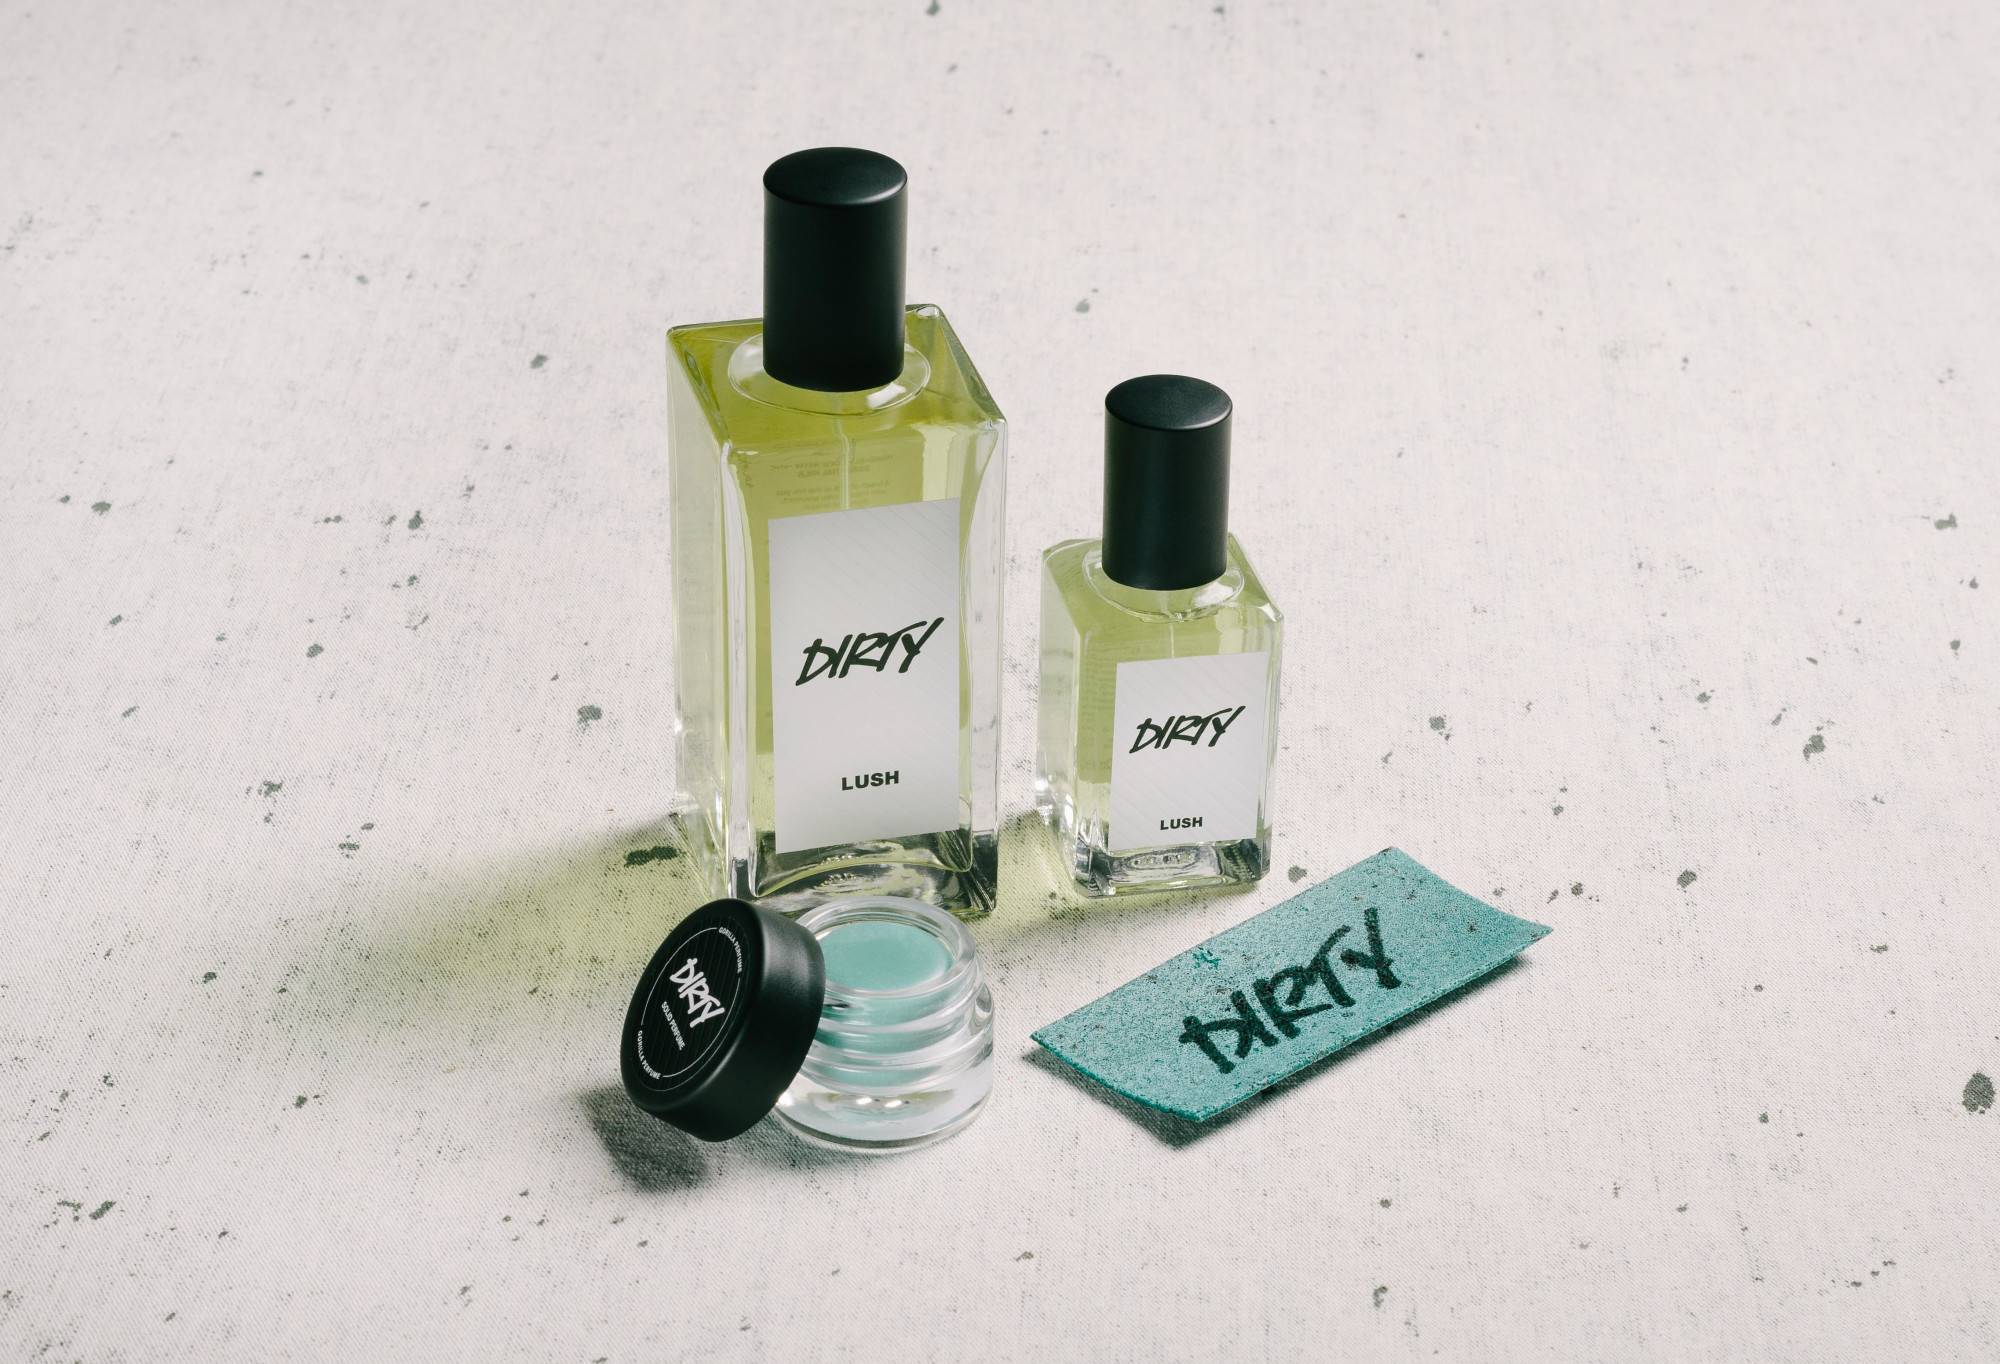 The whole Dirty fragrance collection (bar body spray) is displayed on a white surface, flecked with grey.